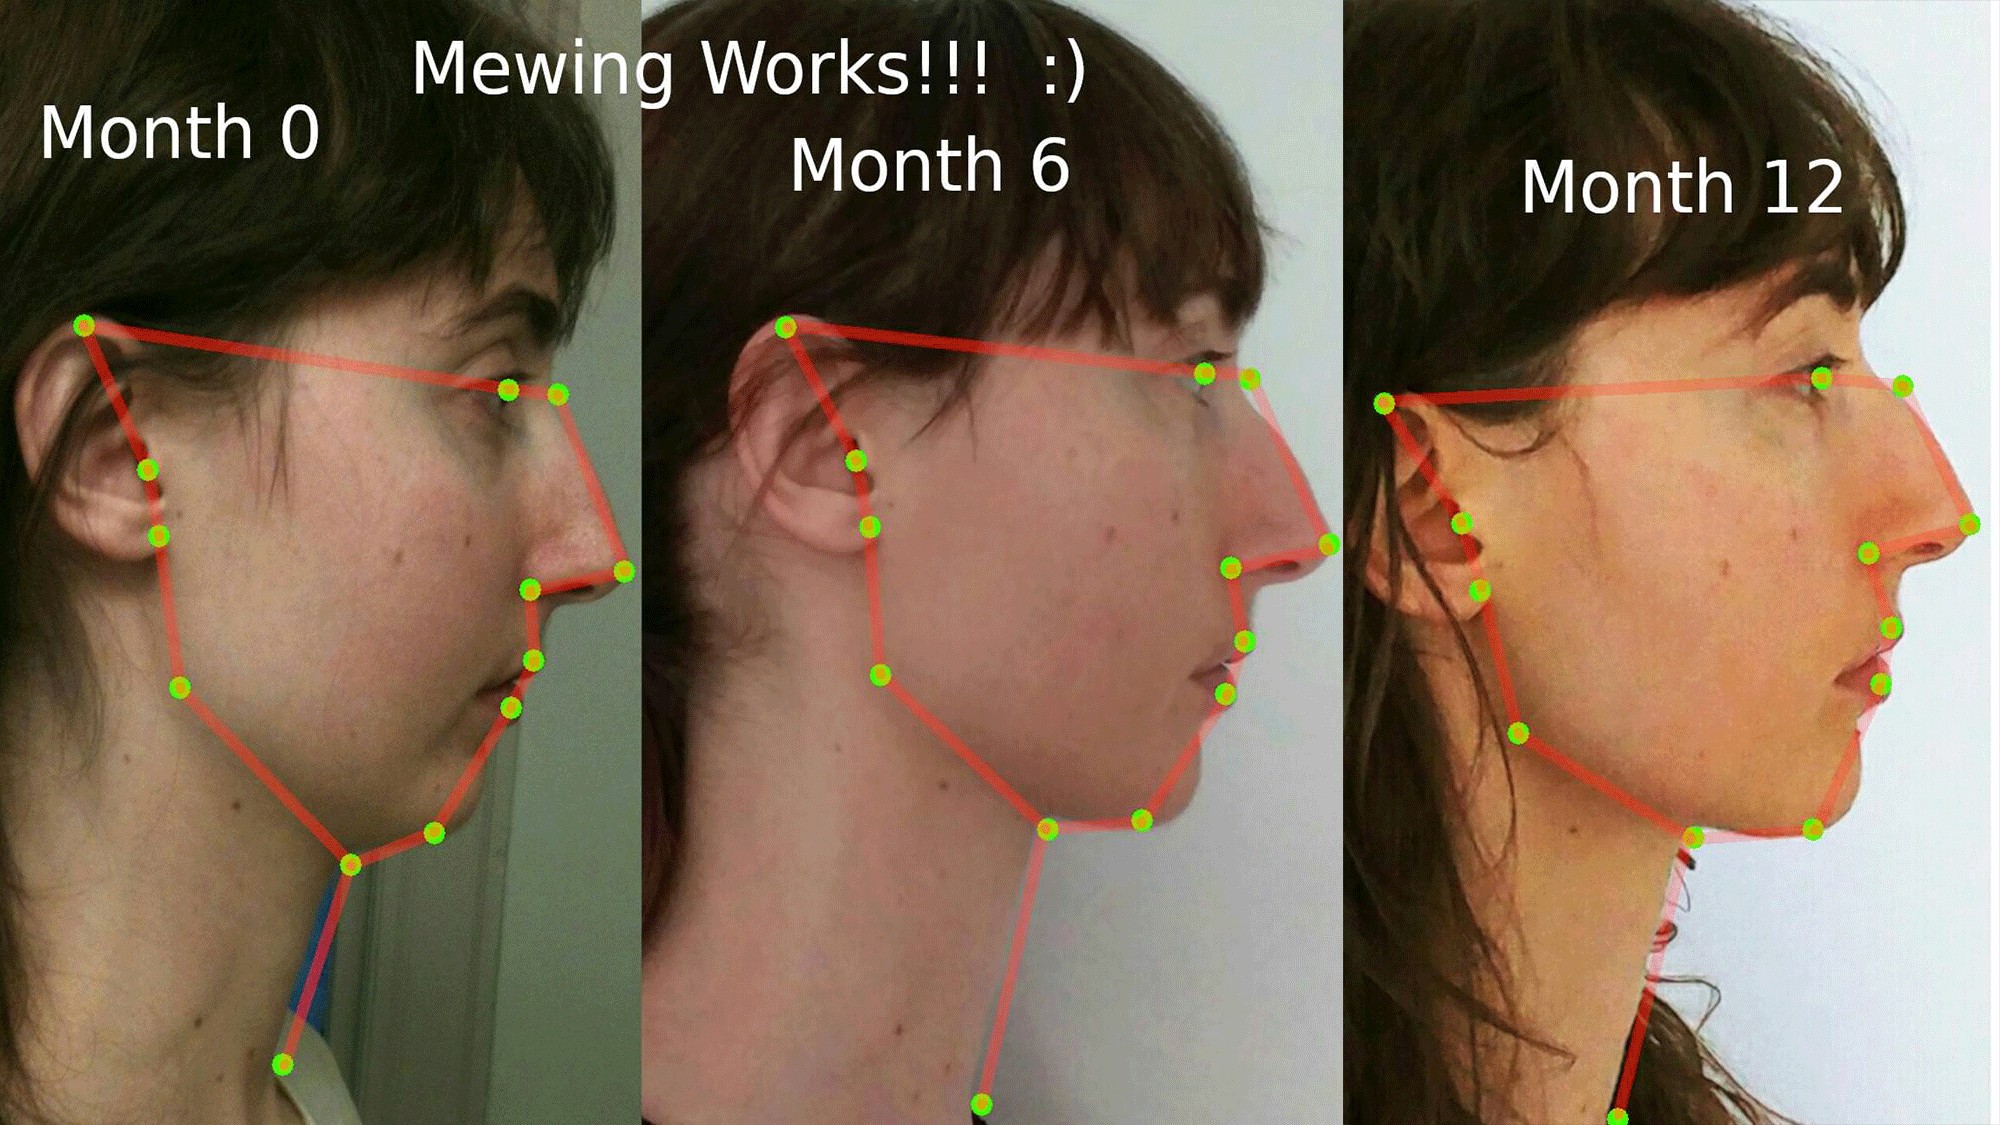 What Is Mewing?